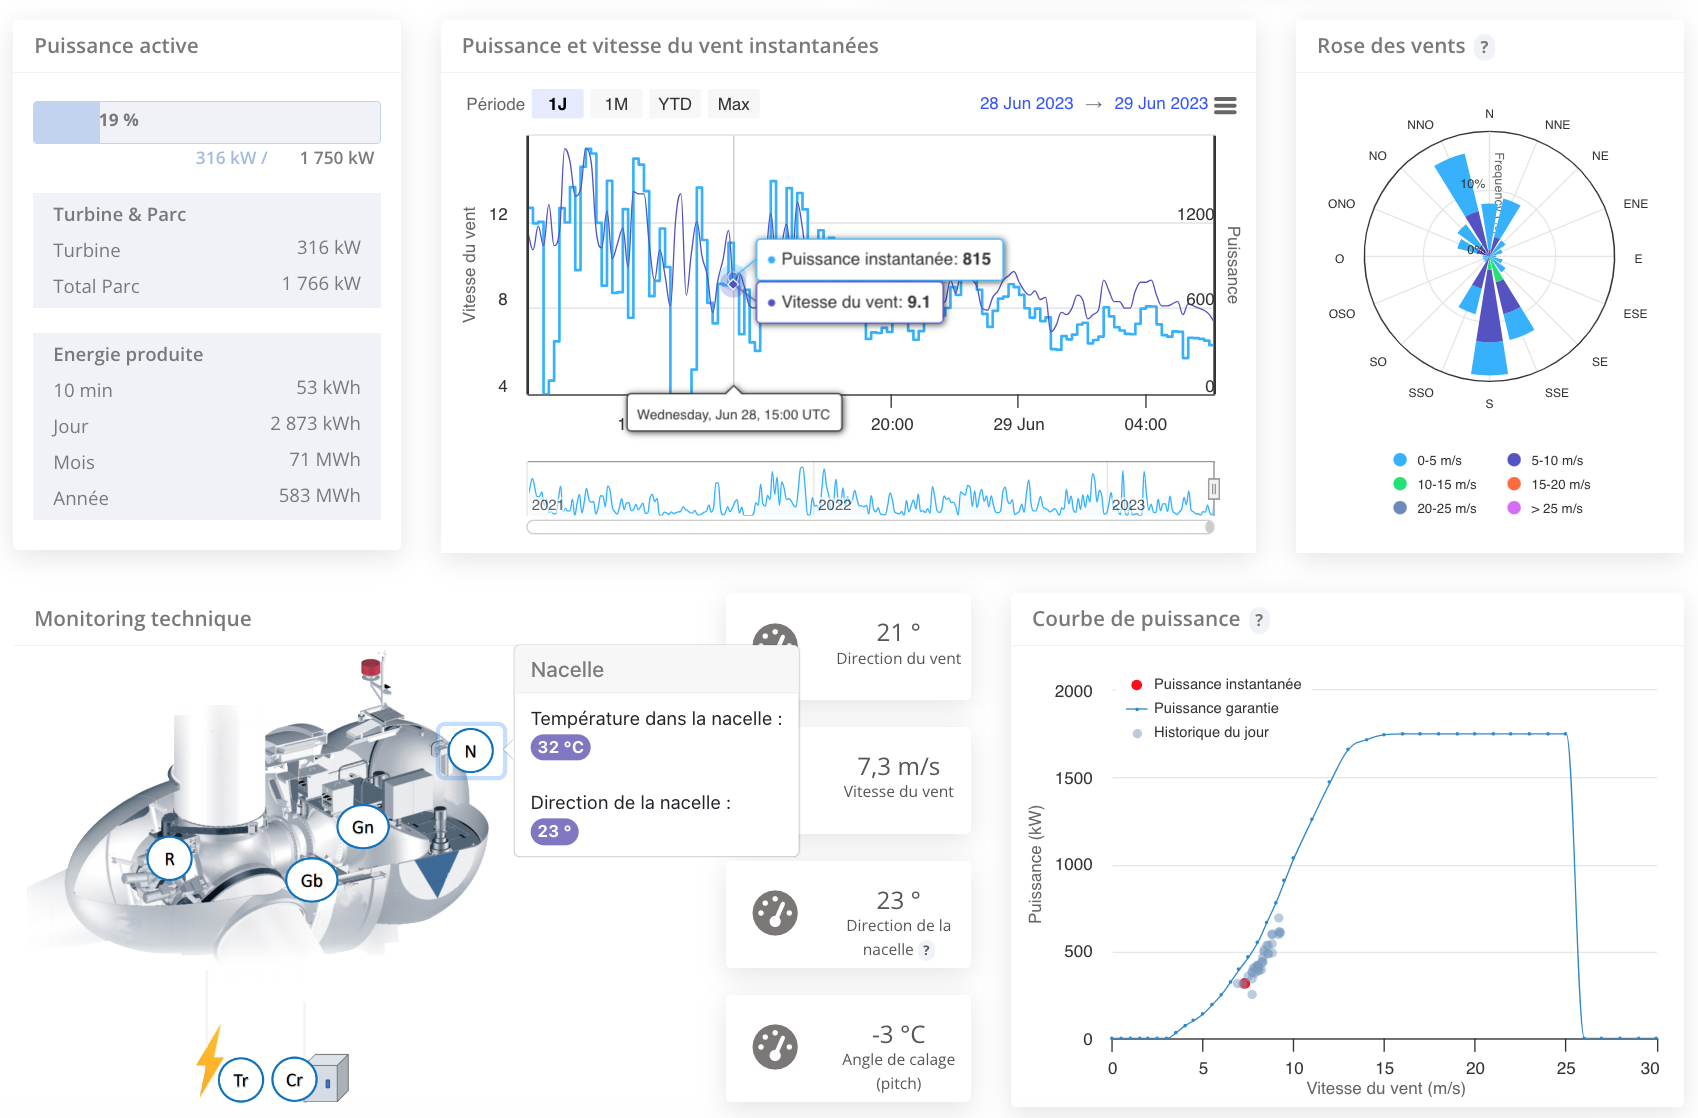 Analytical dashboards of alarms and wind turbine stops